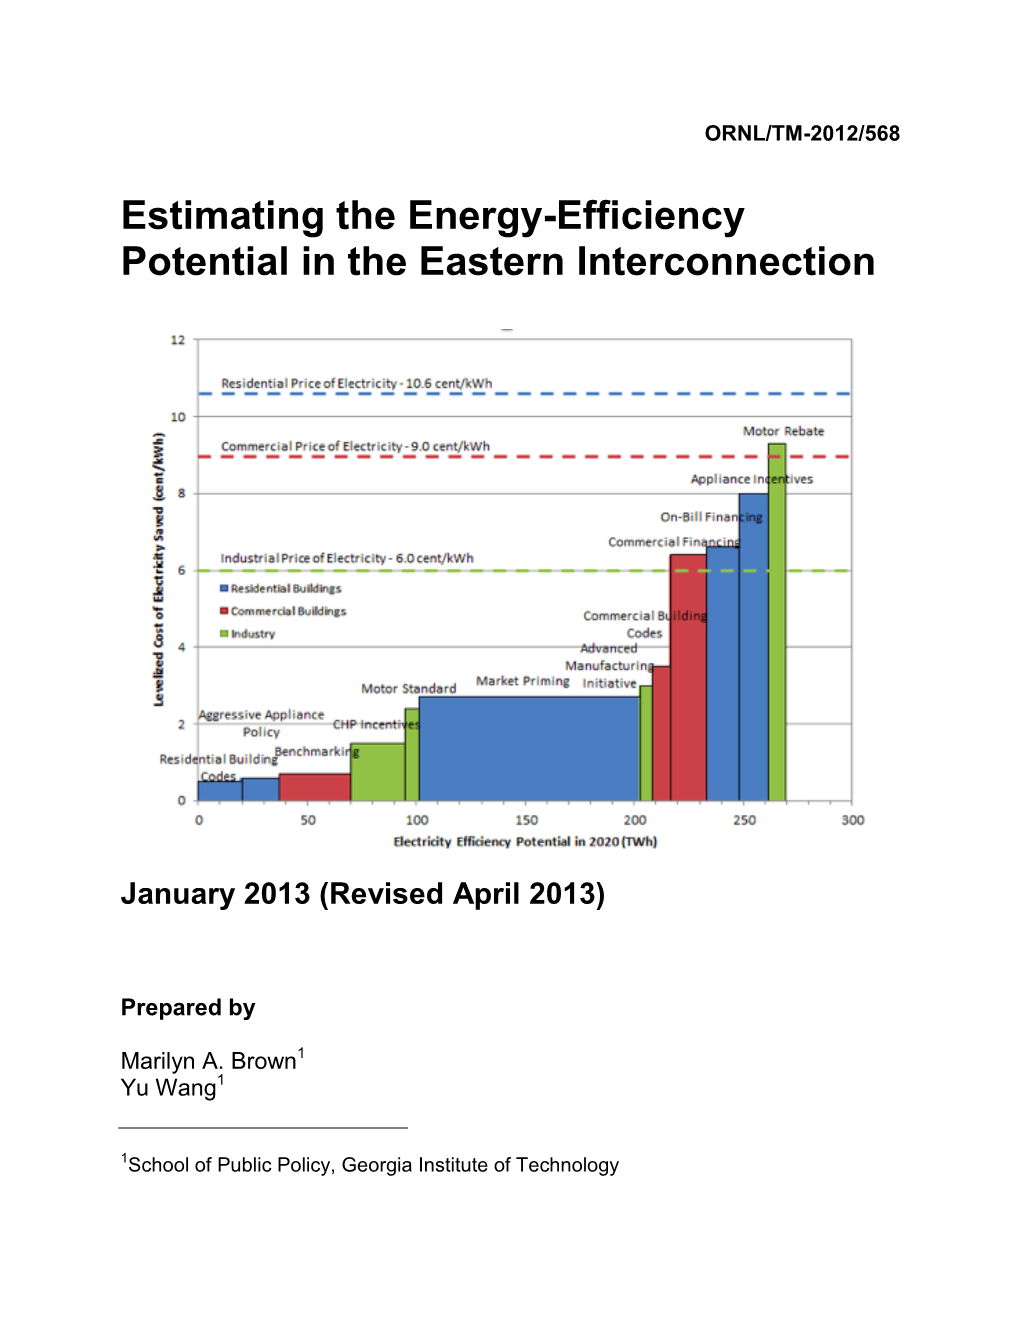 Estimating the Energy-Efficiency Potential in the Eastern Interconnection